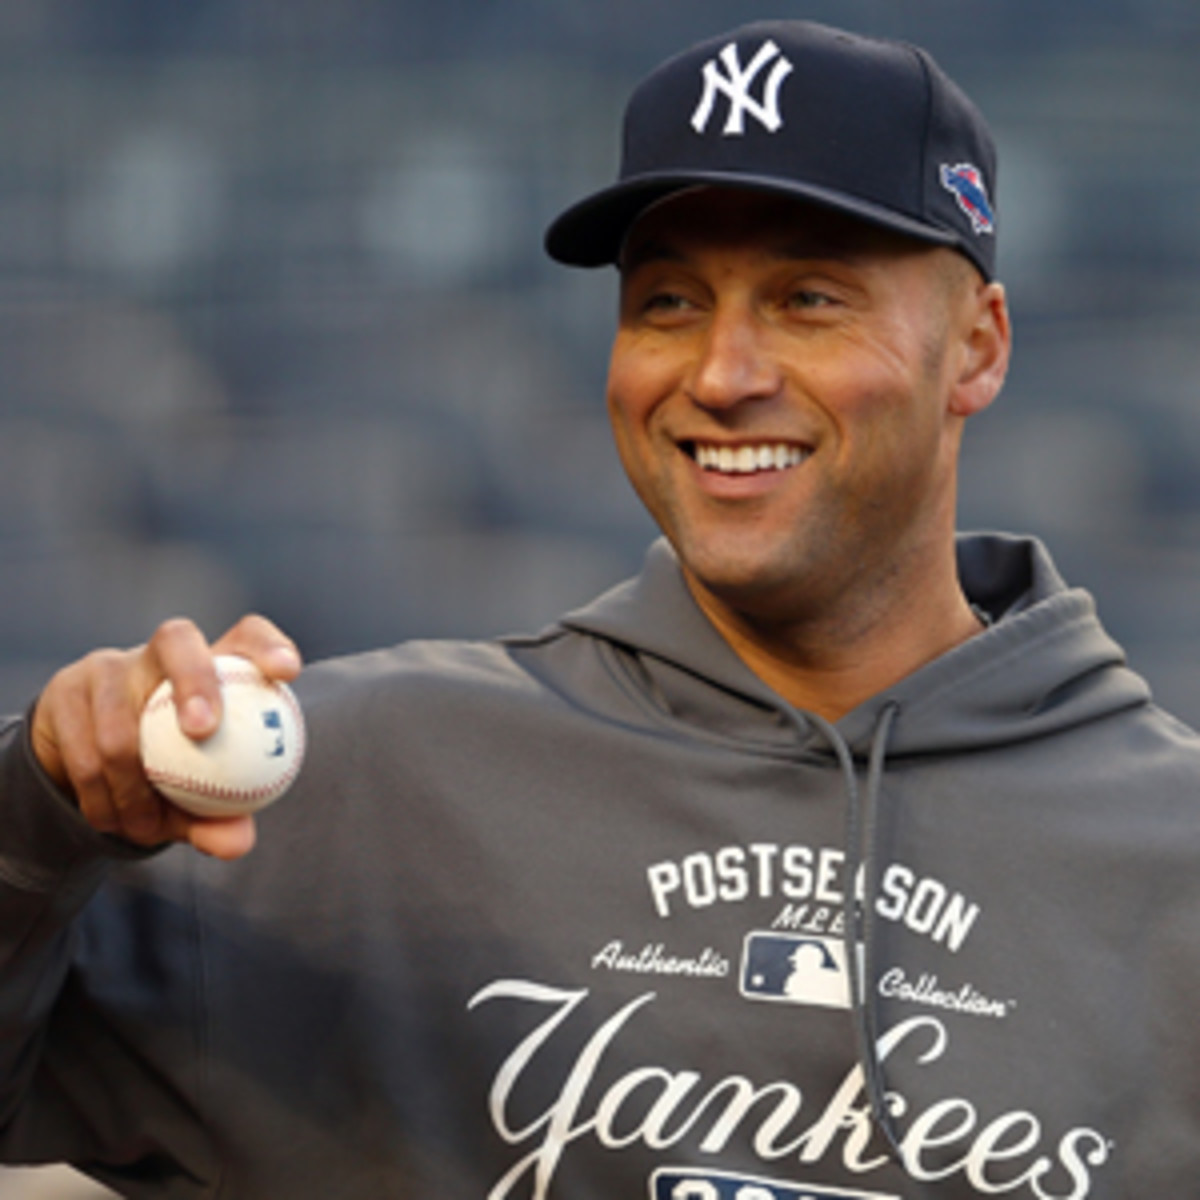 Derek Jeter hopes to be ready for the Yankees' Opening Day. (Elsa/Getty Images)